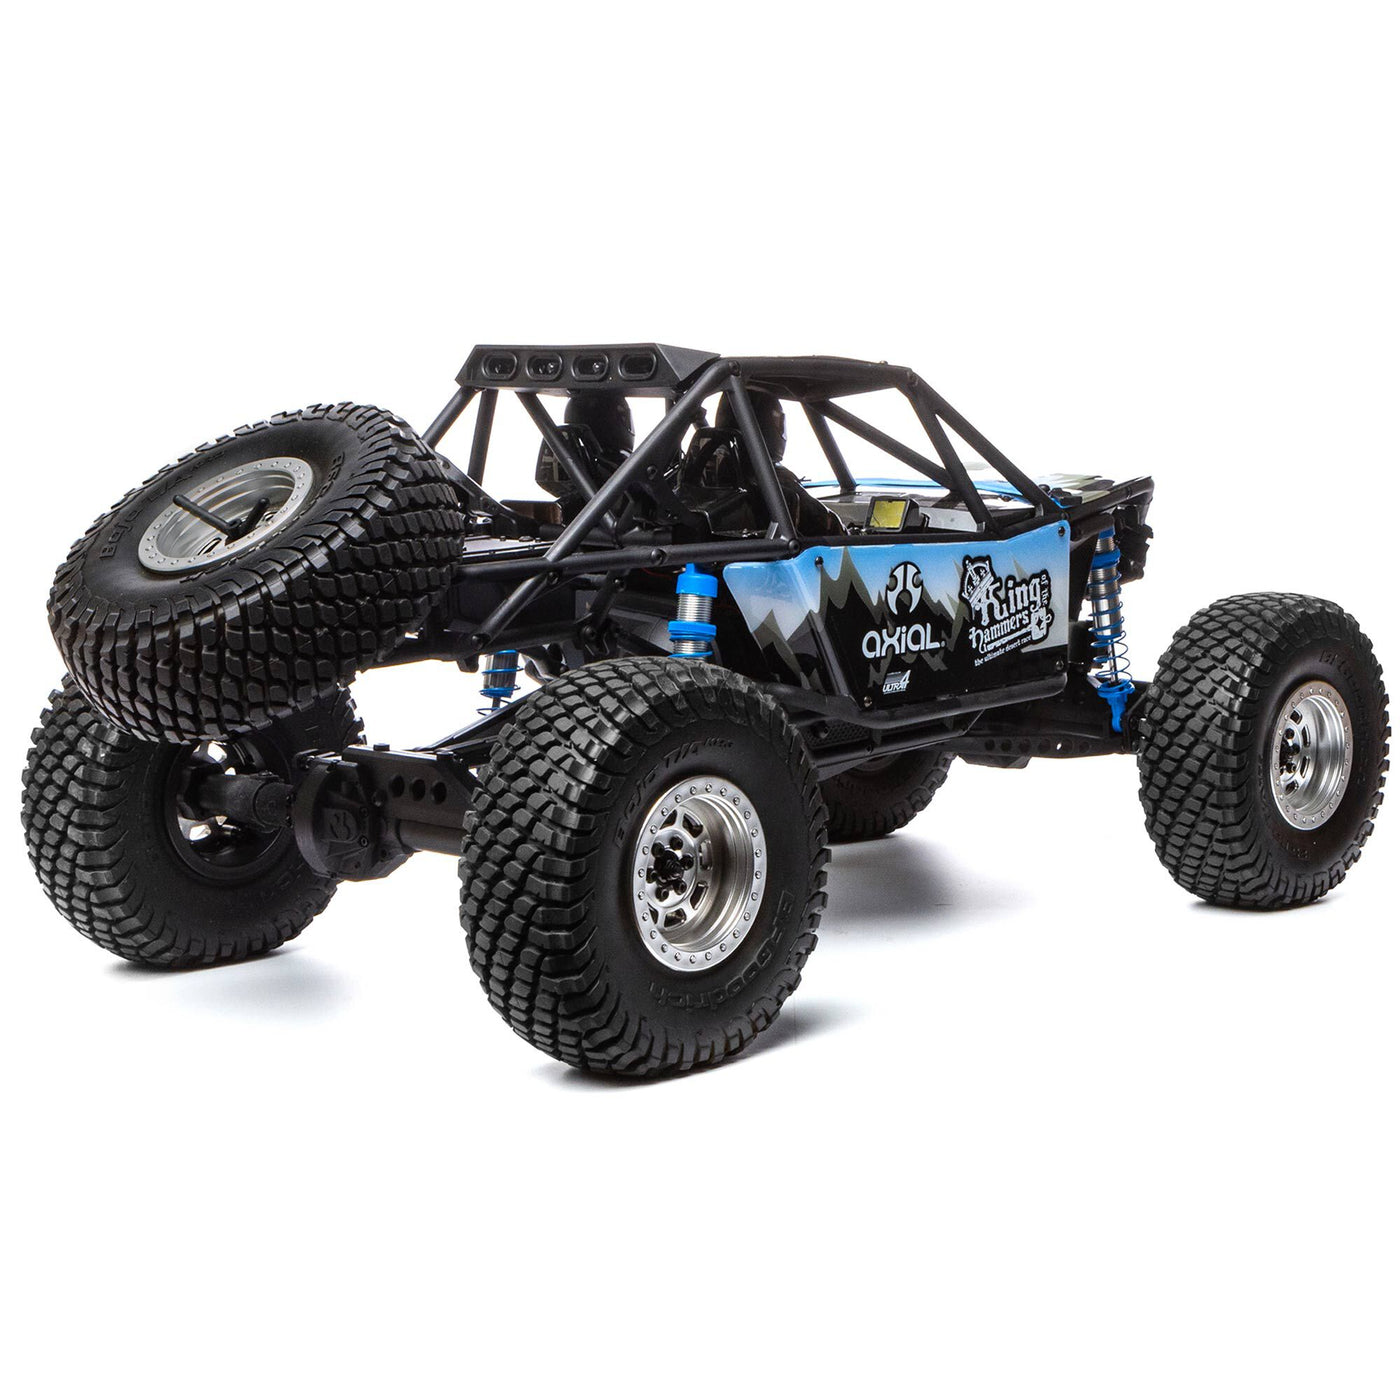 RR10 Bomber KOH Limited Edition 1/10th 4WD RTR Axial AXI03013